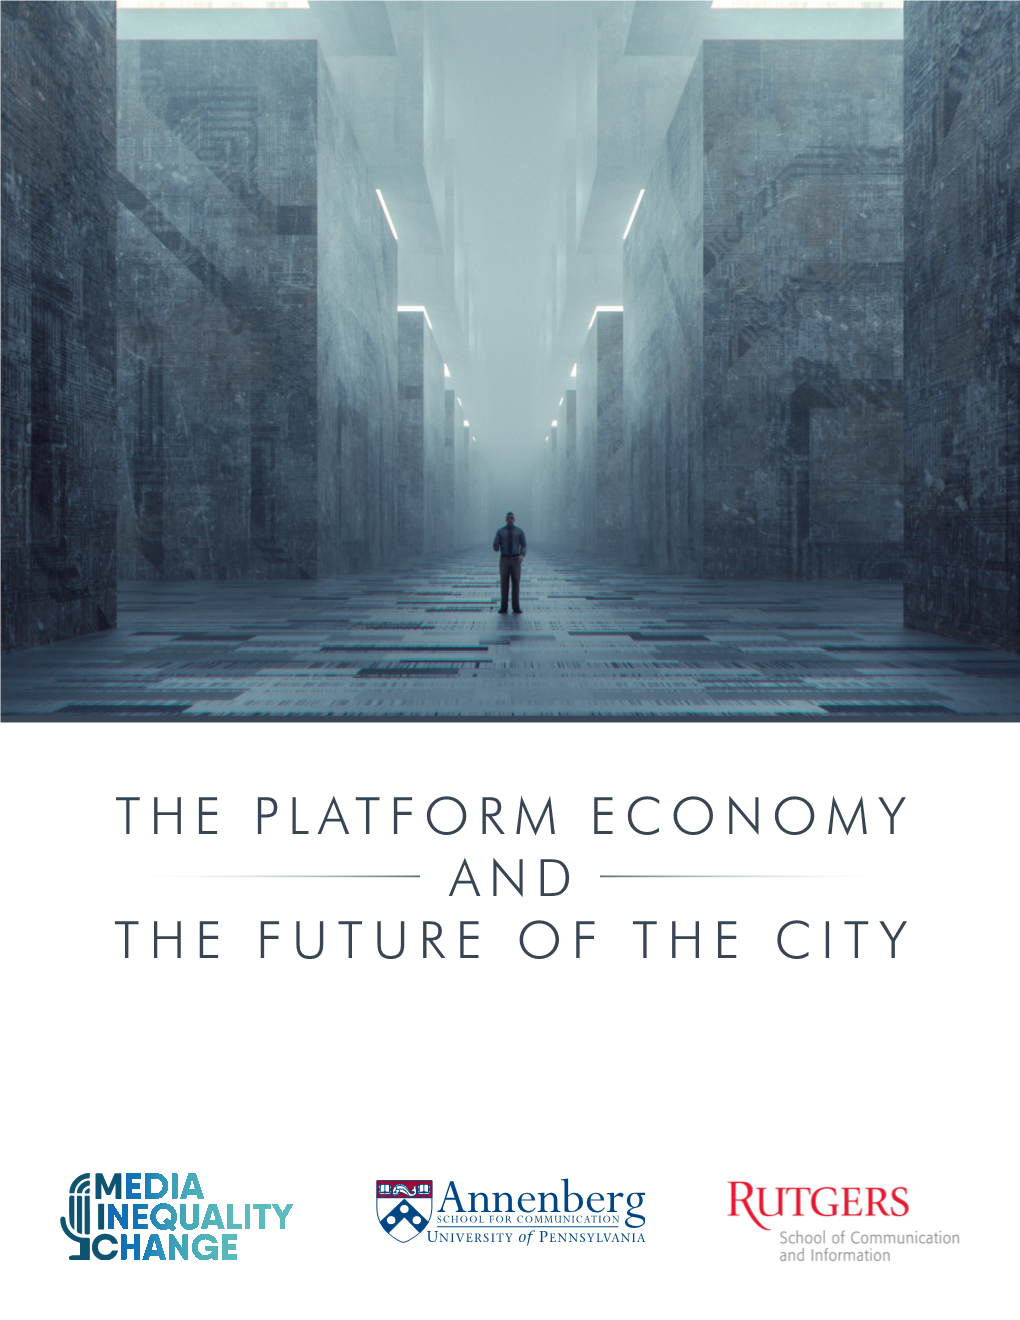 Read "The Platform Economy and the Future of the City"